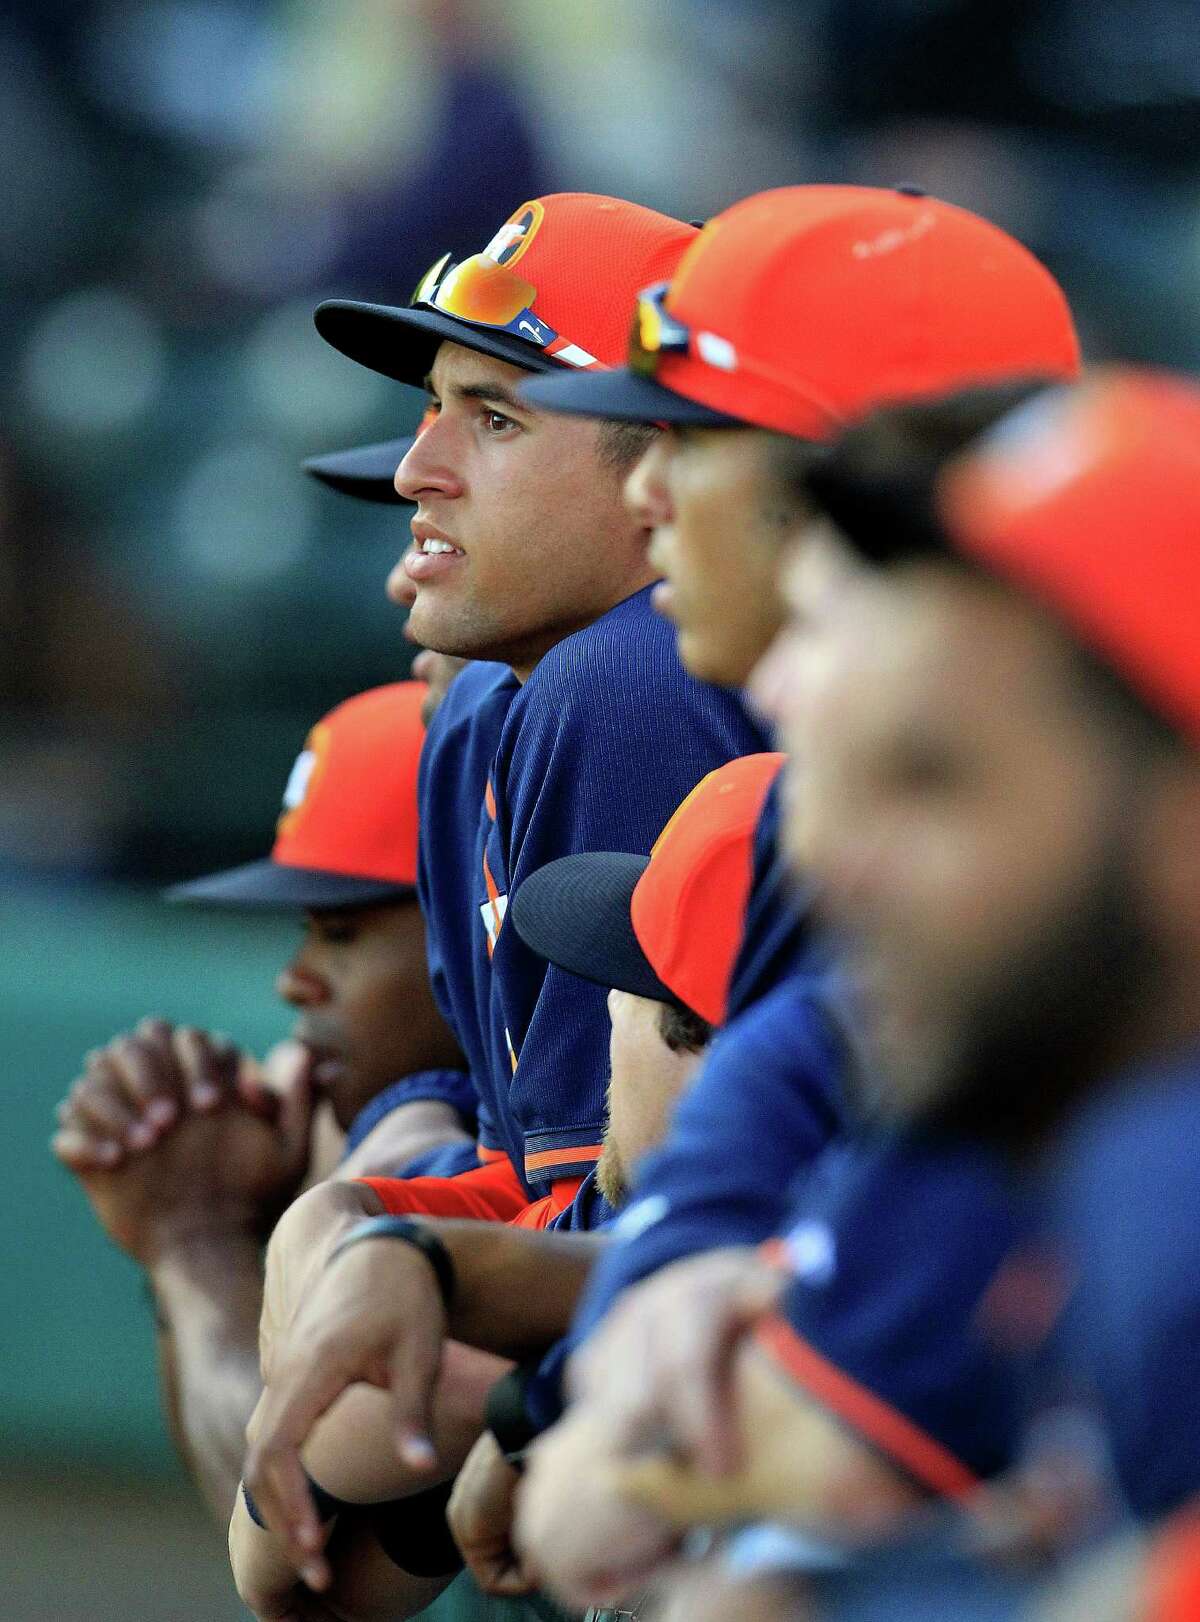 When George Springer looks at his approach at the plate, he sees someone in control, not the free swinger others perceive.